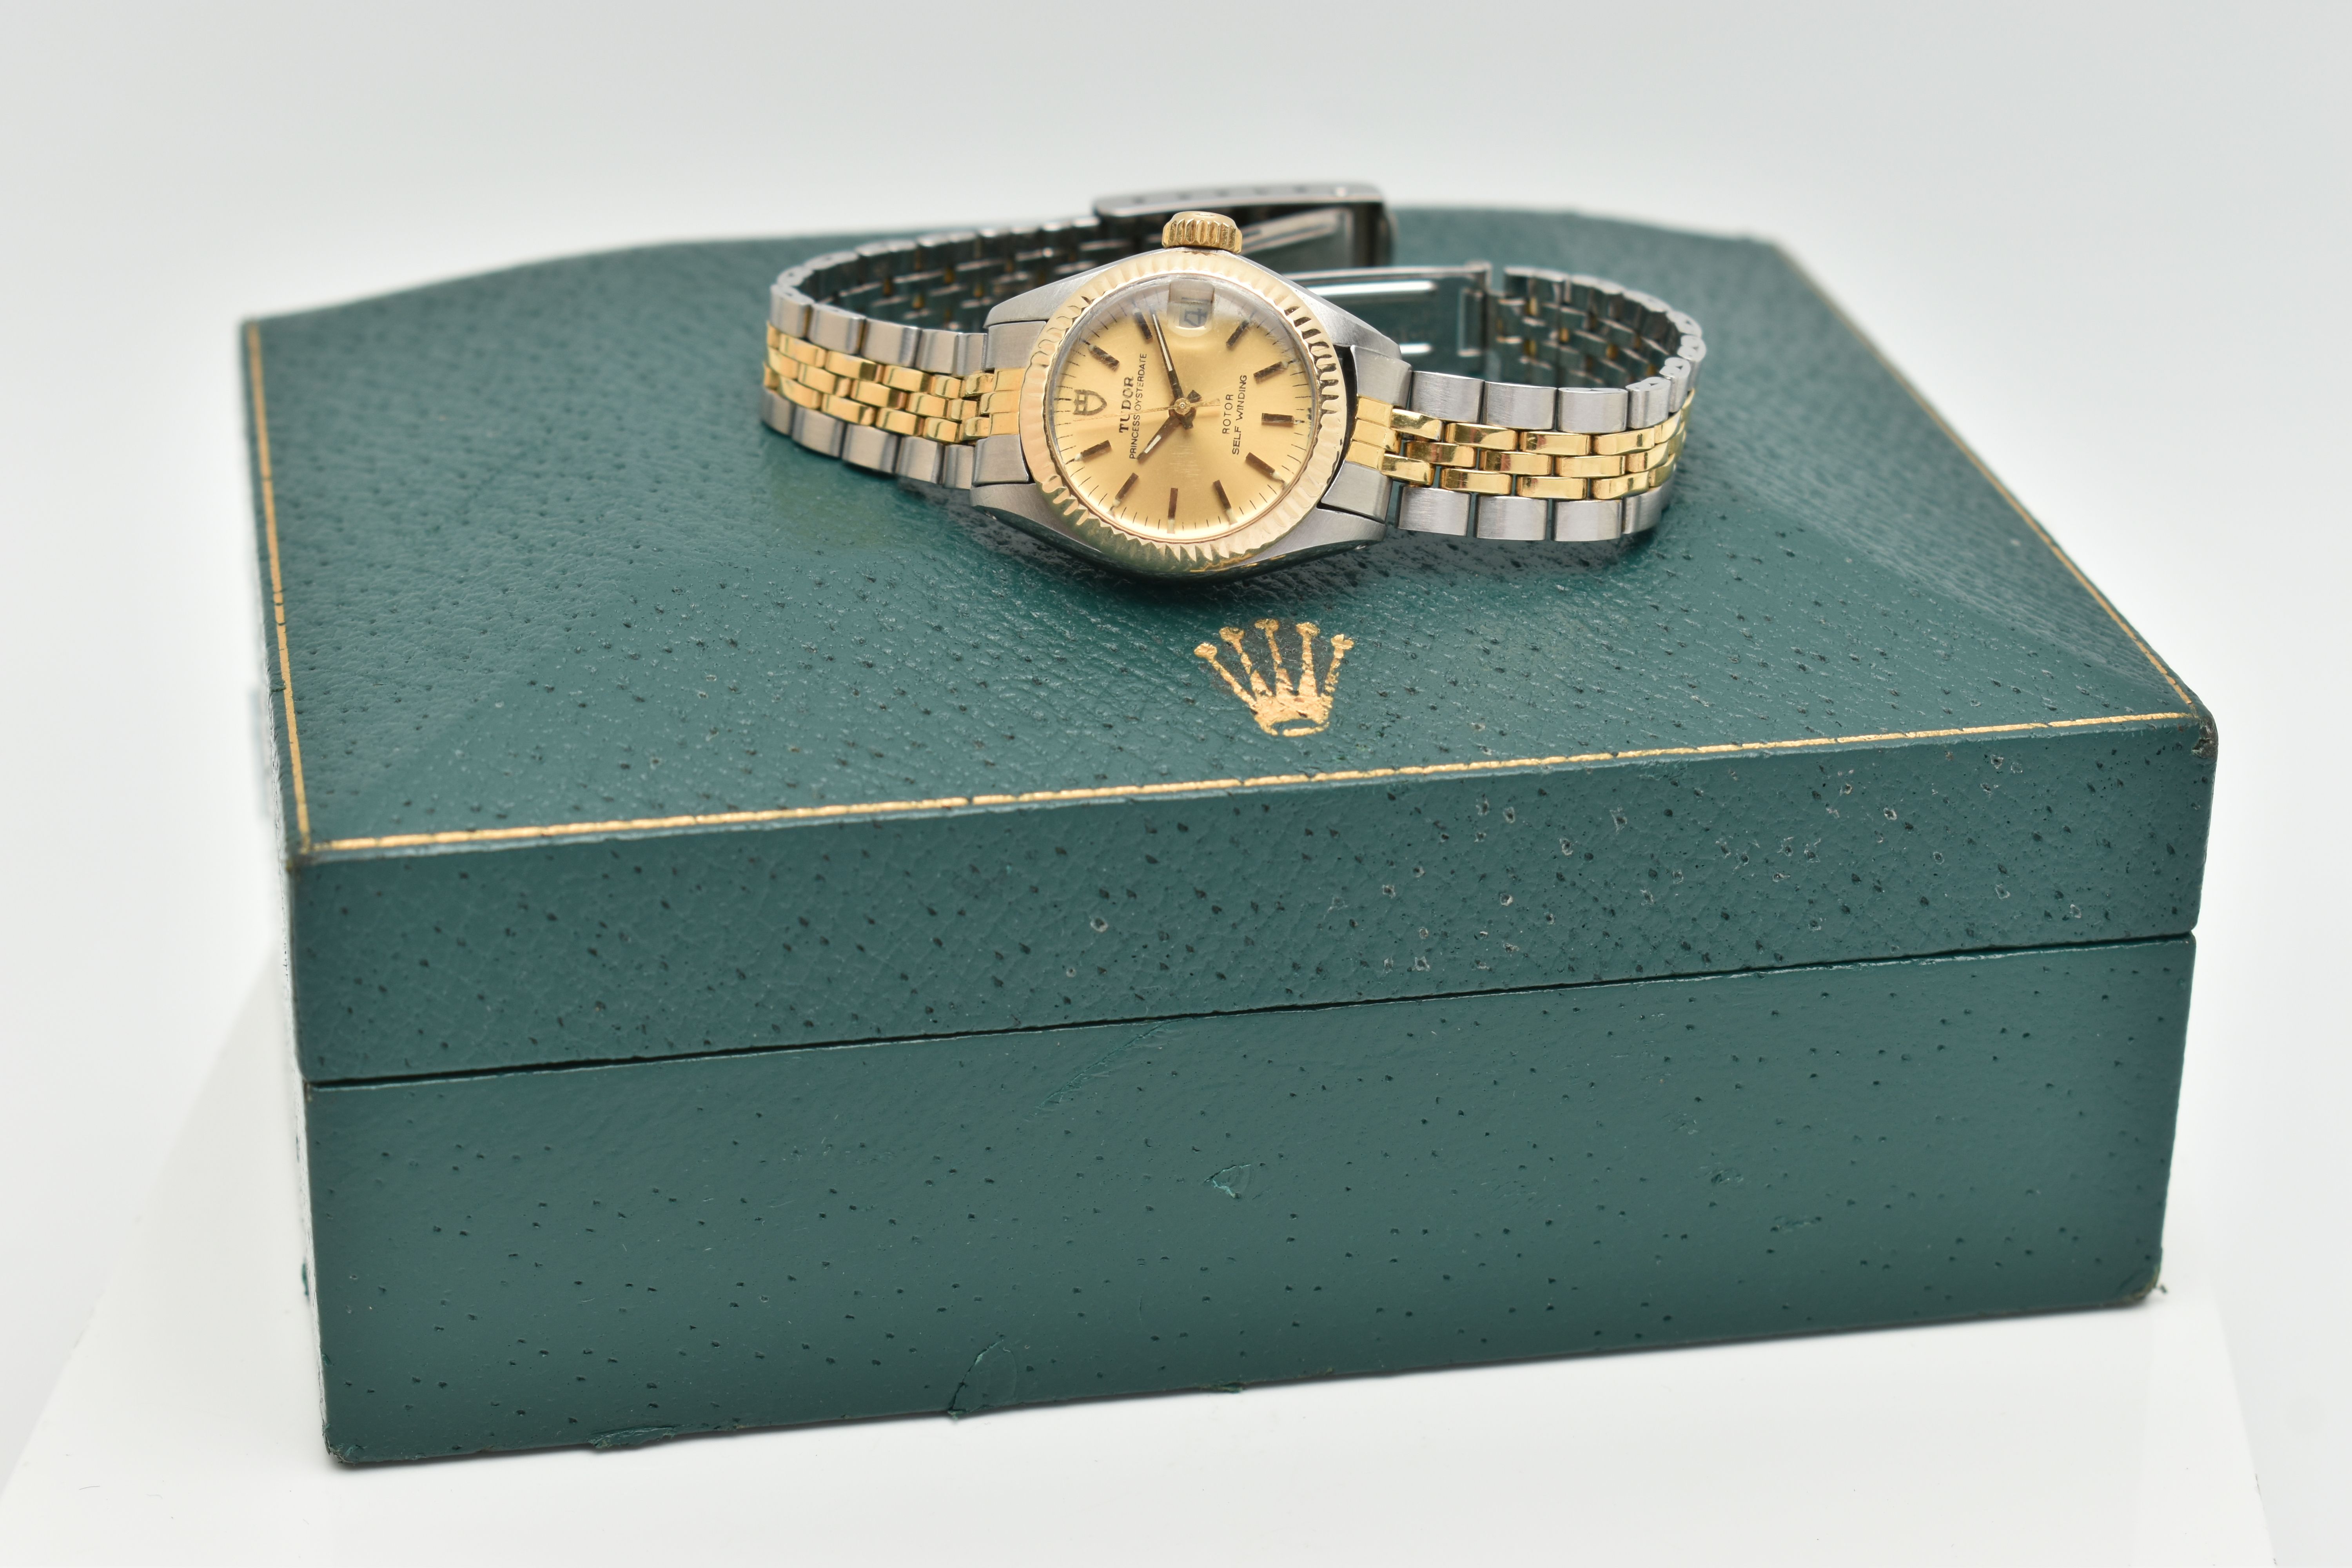 A LADYS 'TUDOR' WRISTWATCH, round gold dial signed 'Tudor Princess Oyster date, Rotor Self Winding', - Image 9 of 10